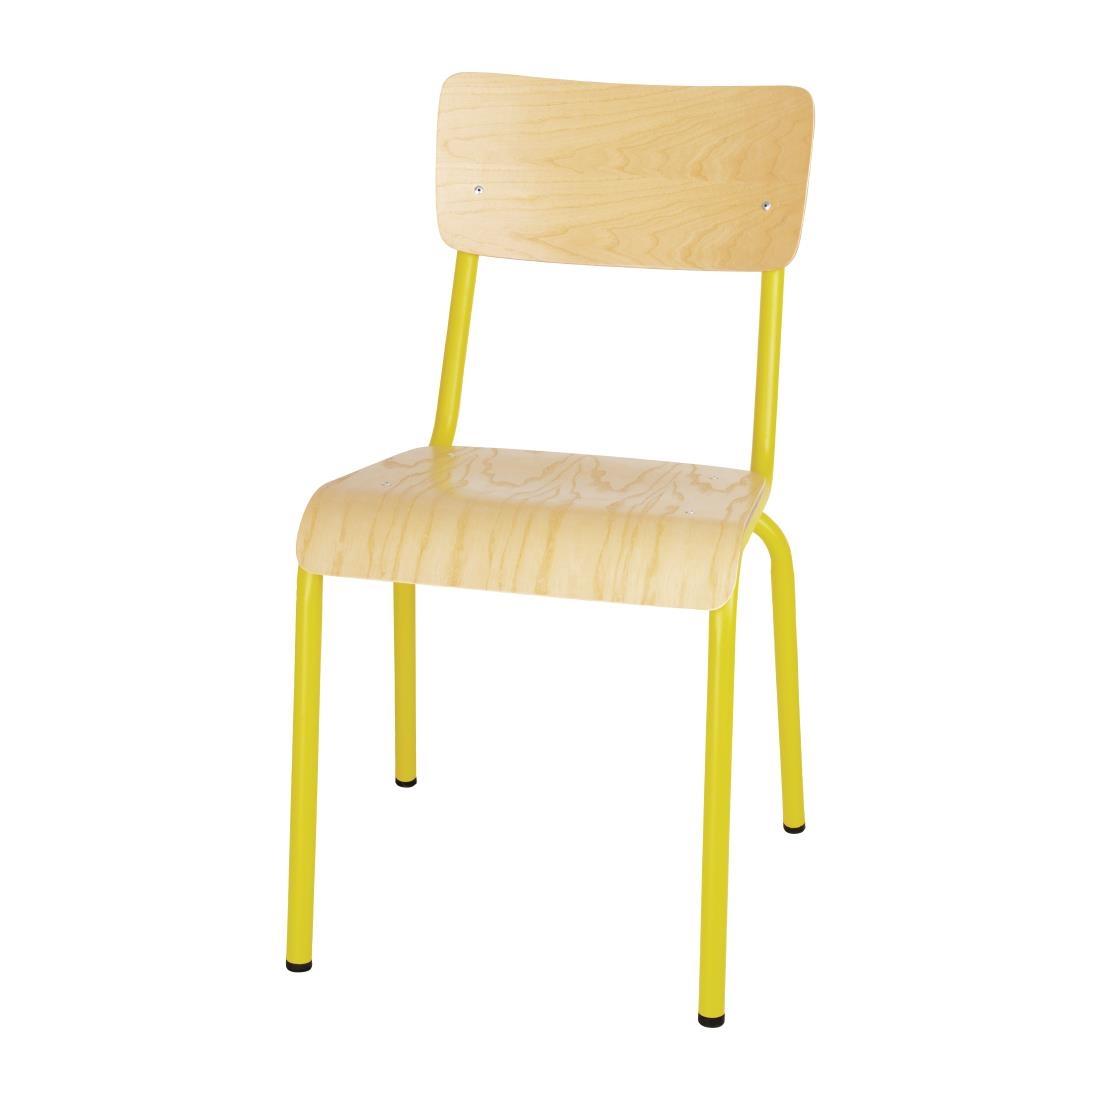 Bolero Cantina Side Chairs with Wooden Seat Pad and Backrest Yellow (Pack of 4) - FB948  - 1